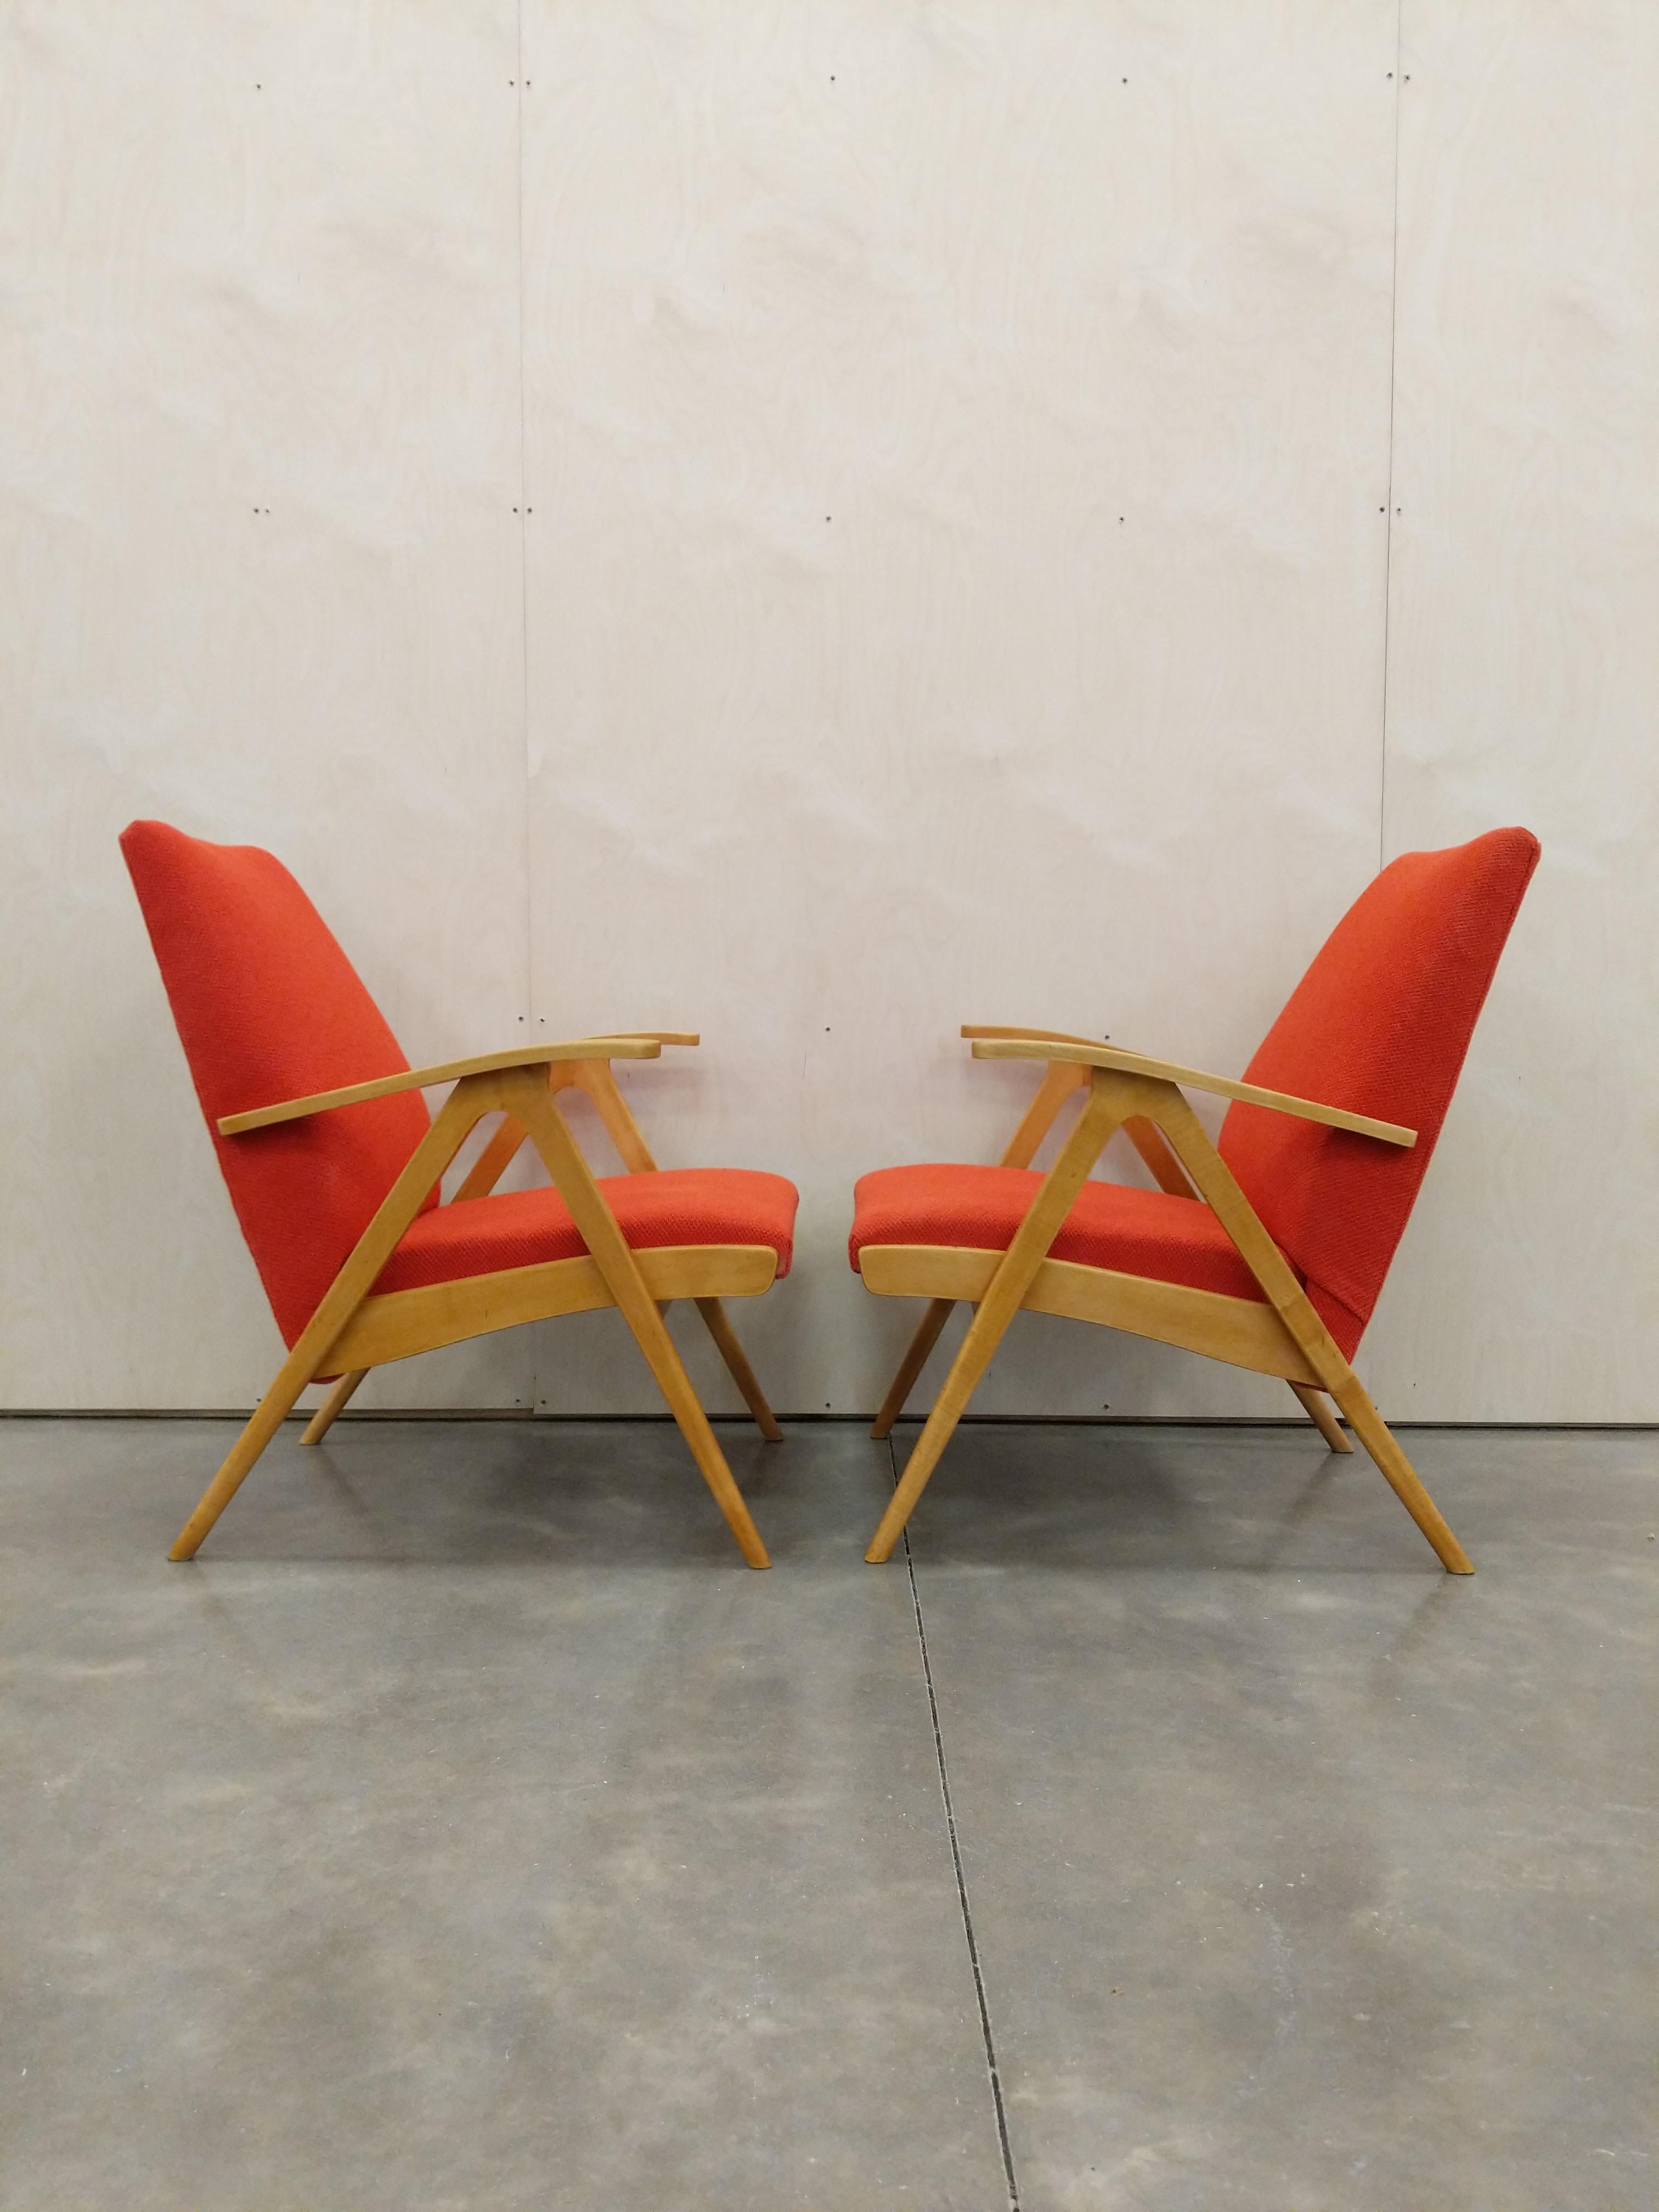 Pair of authentic vintage Czech mid century modern lounge chairs.

This set is in excellent vintage condition with brand new Knoll upholstery and very few signs of age-related wear (see photos).

We used Knoll 